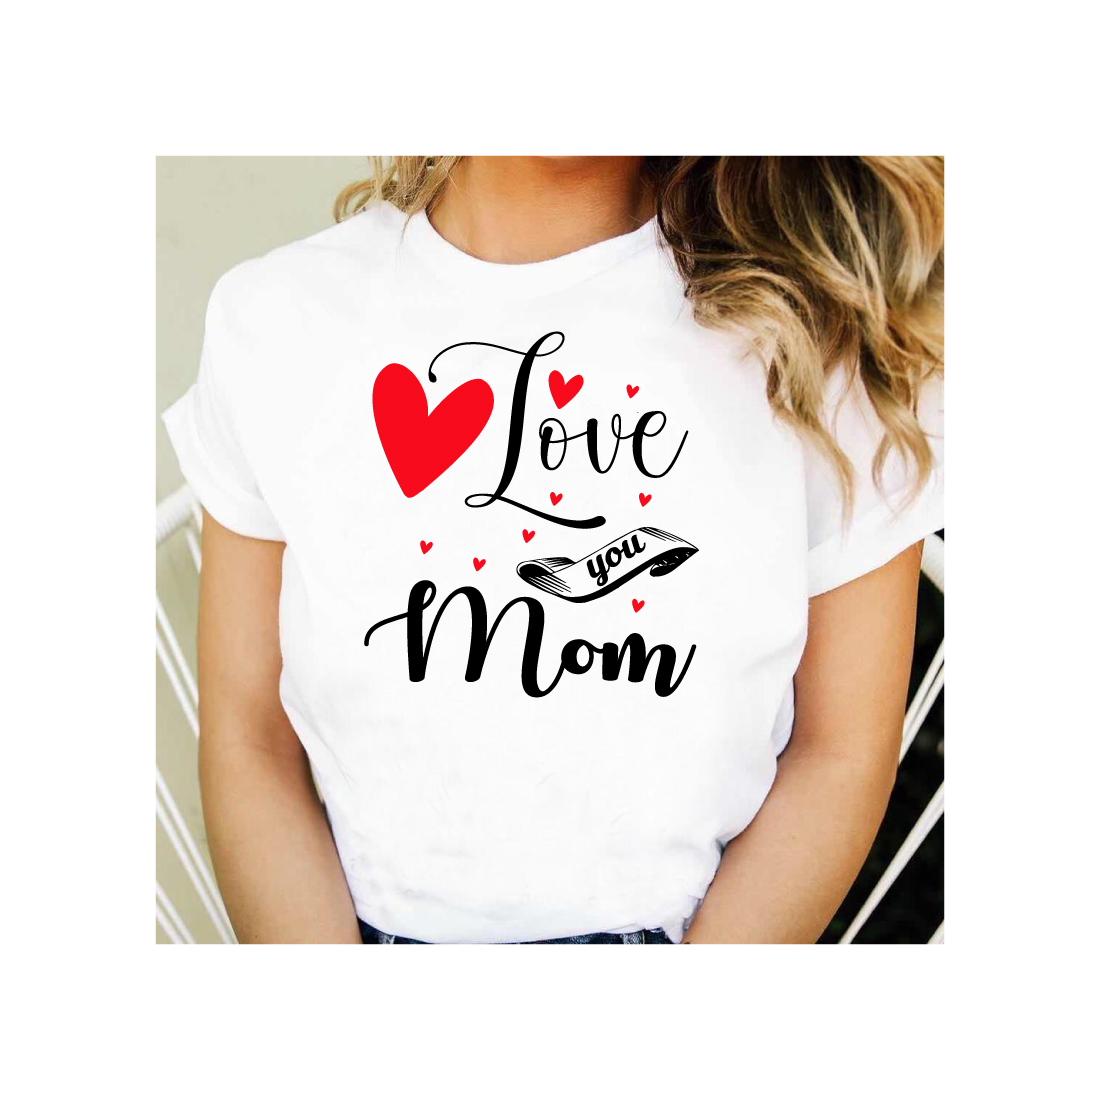 Woman wearing a t - shirt that says love and mom.